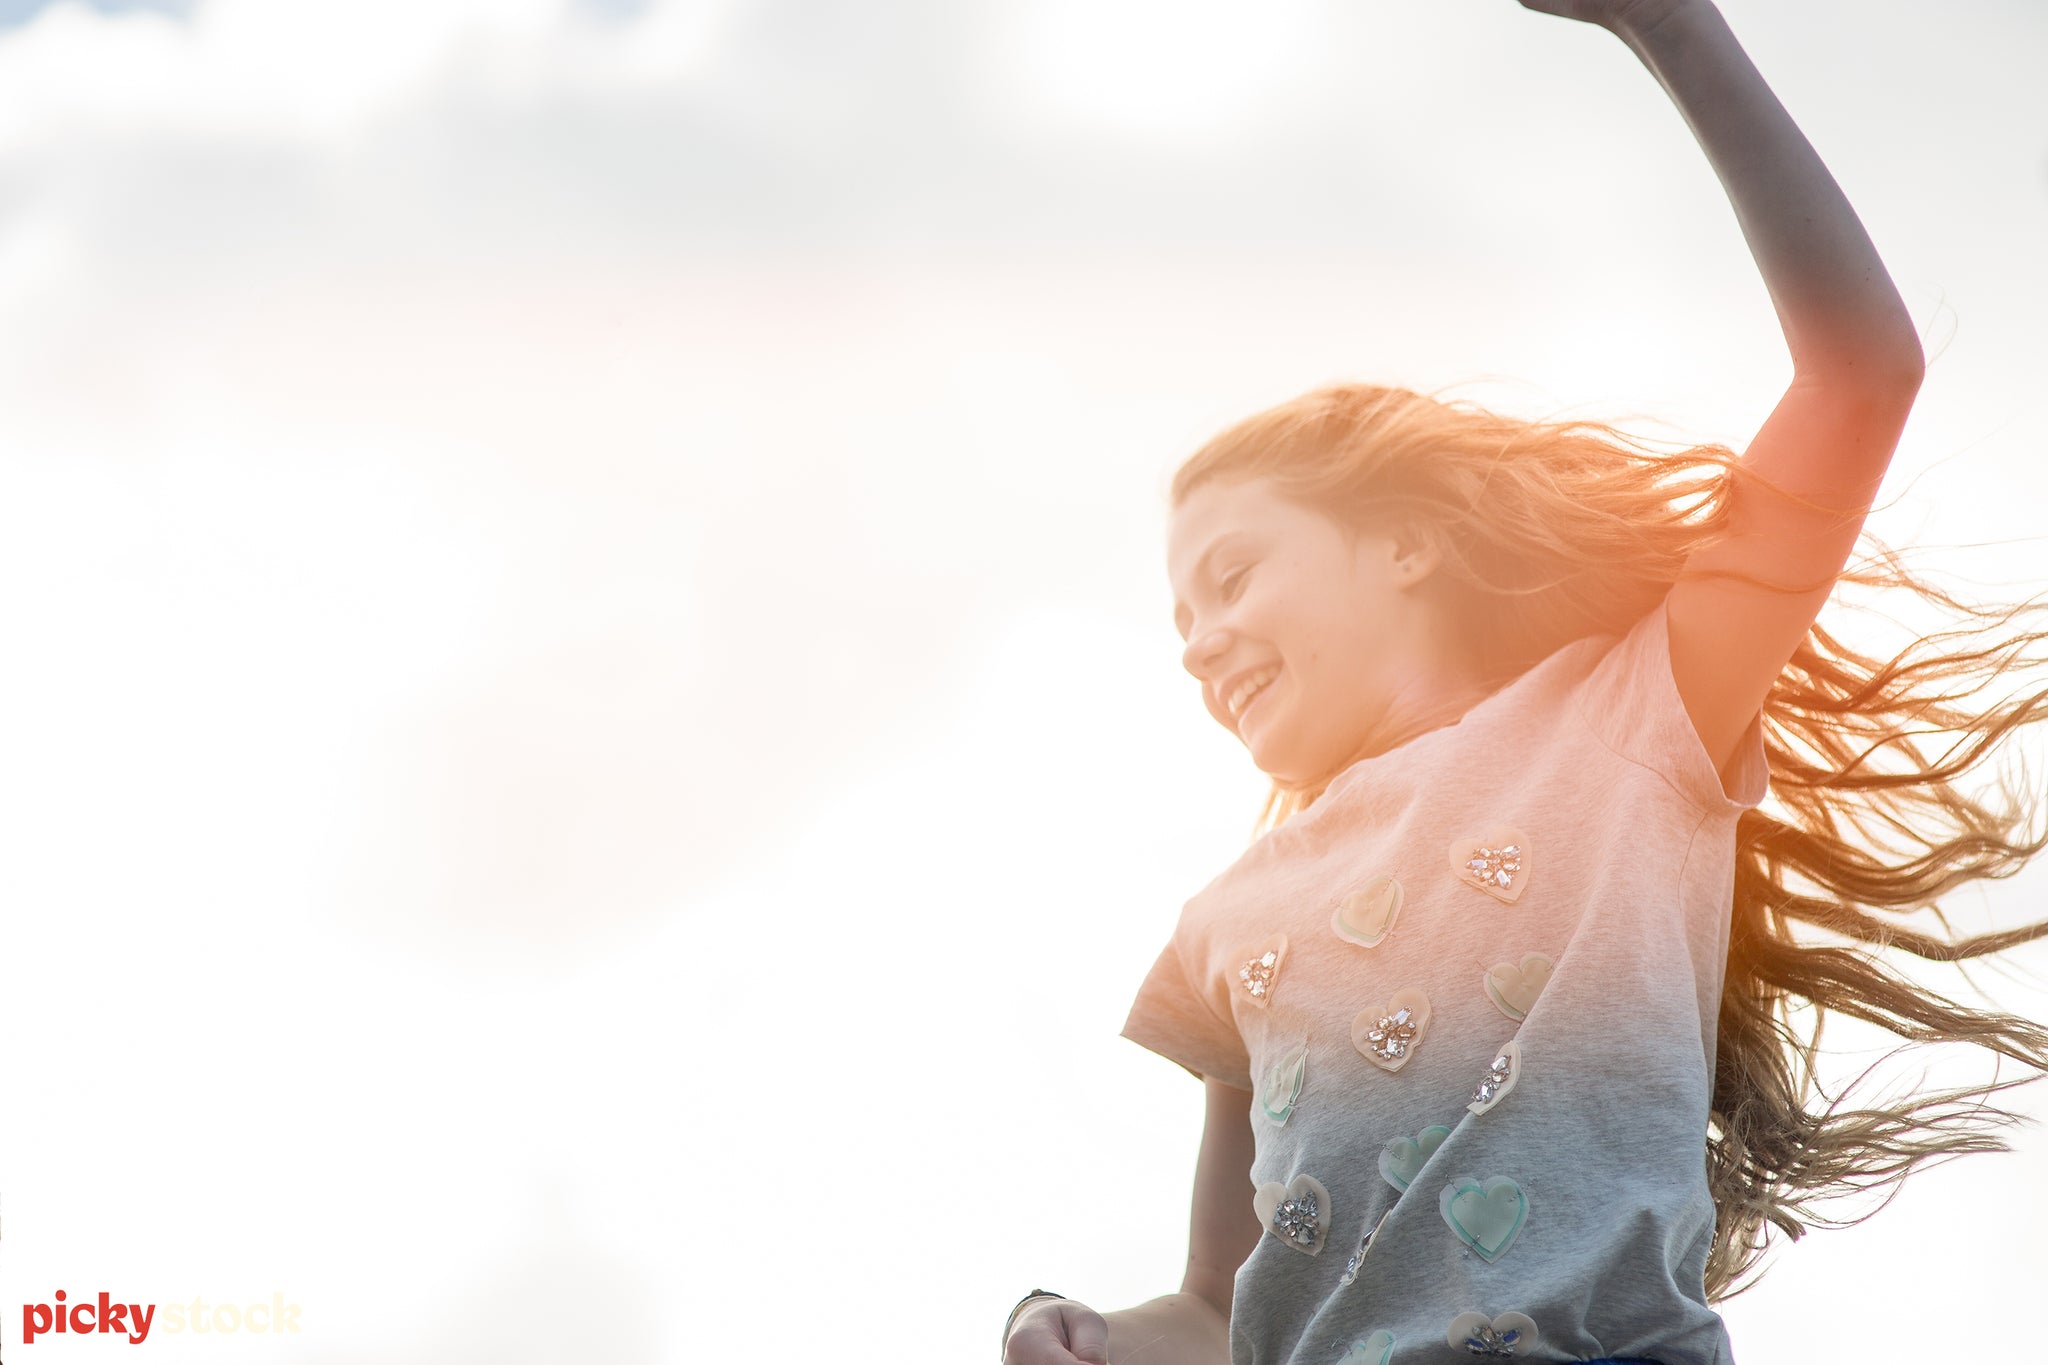 Landscape close-up of a young girl running while the sun shines an orange veil over her face while the wind blows her hair.